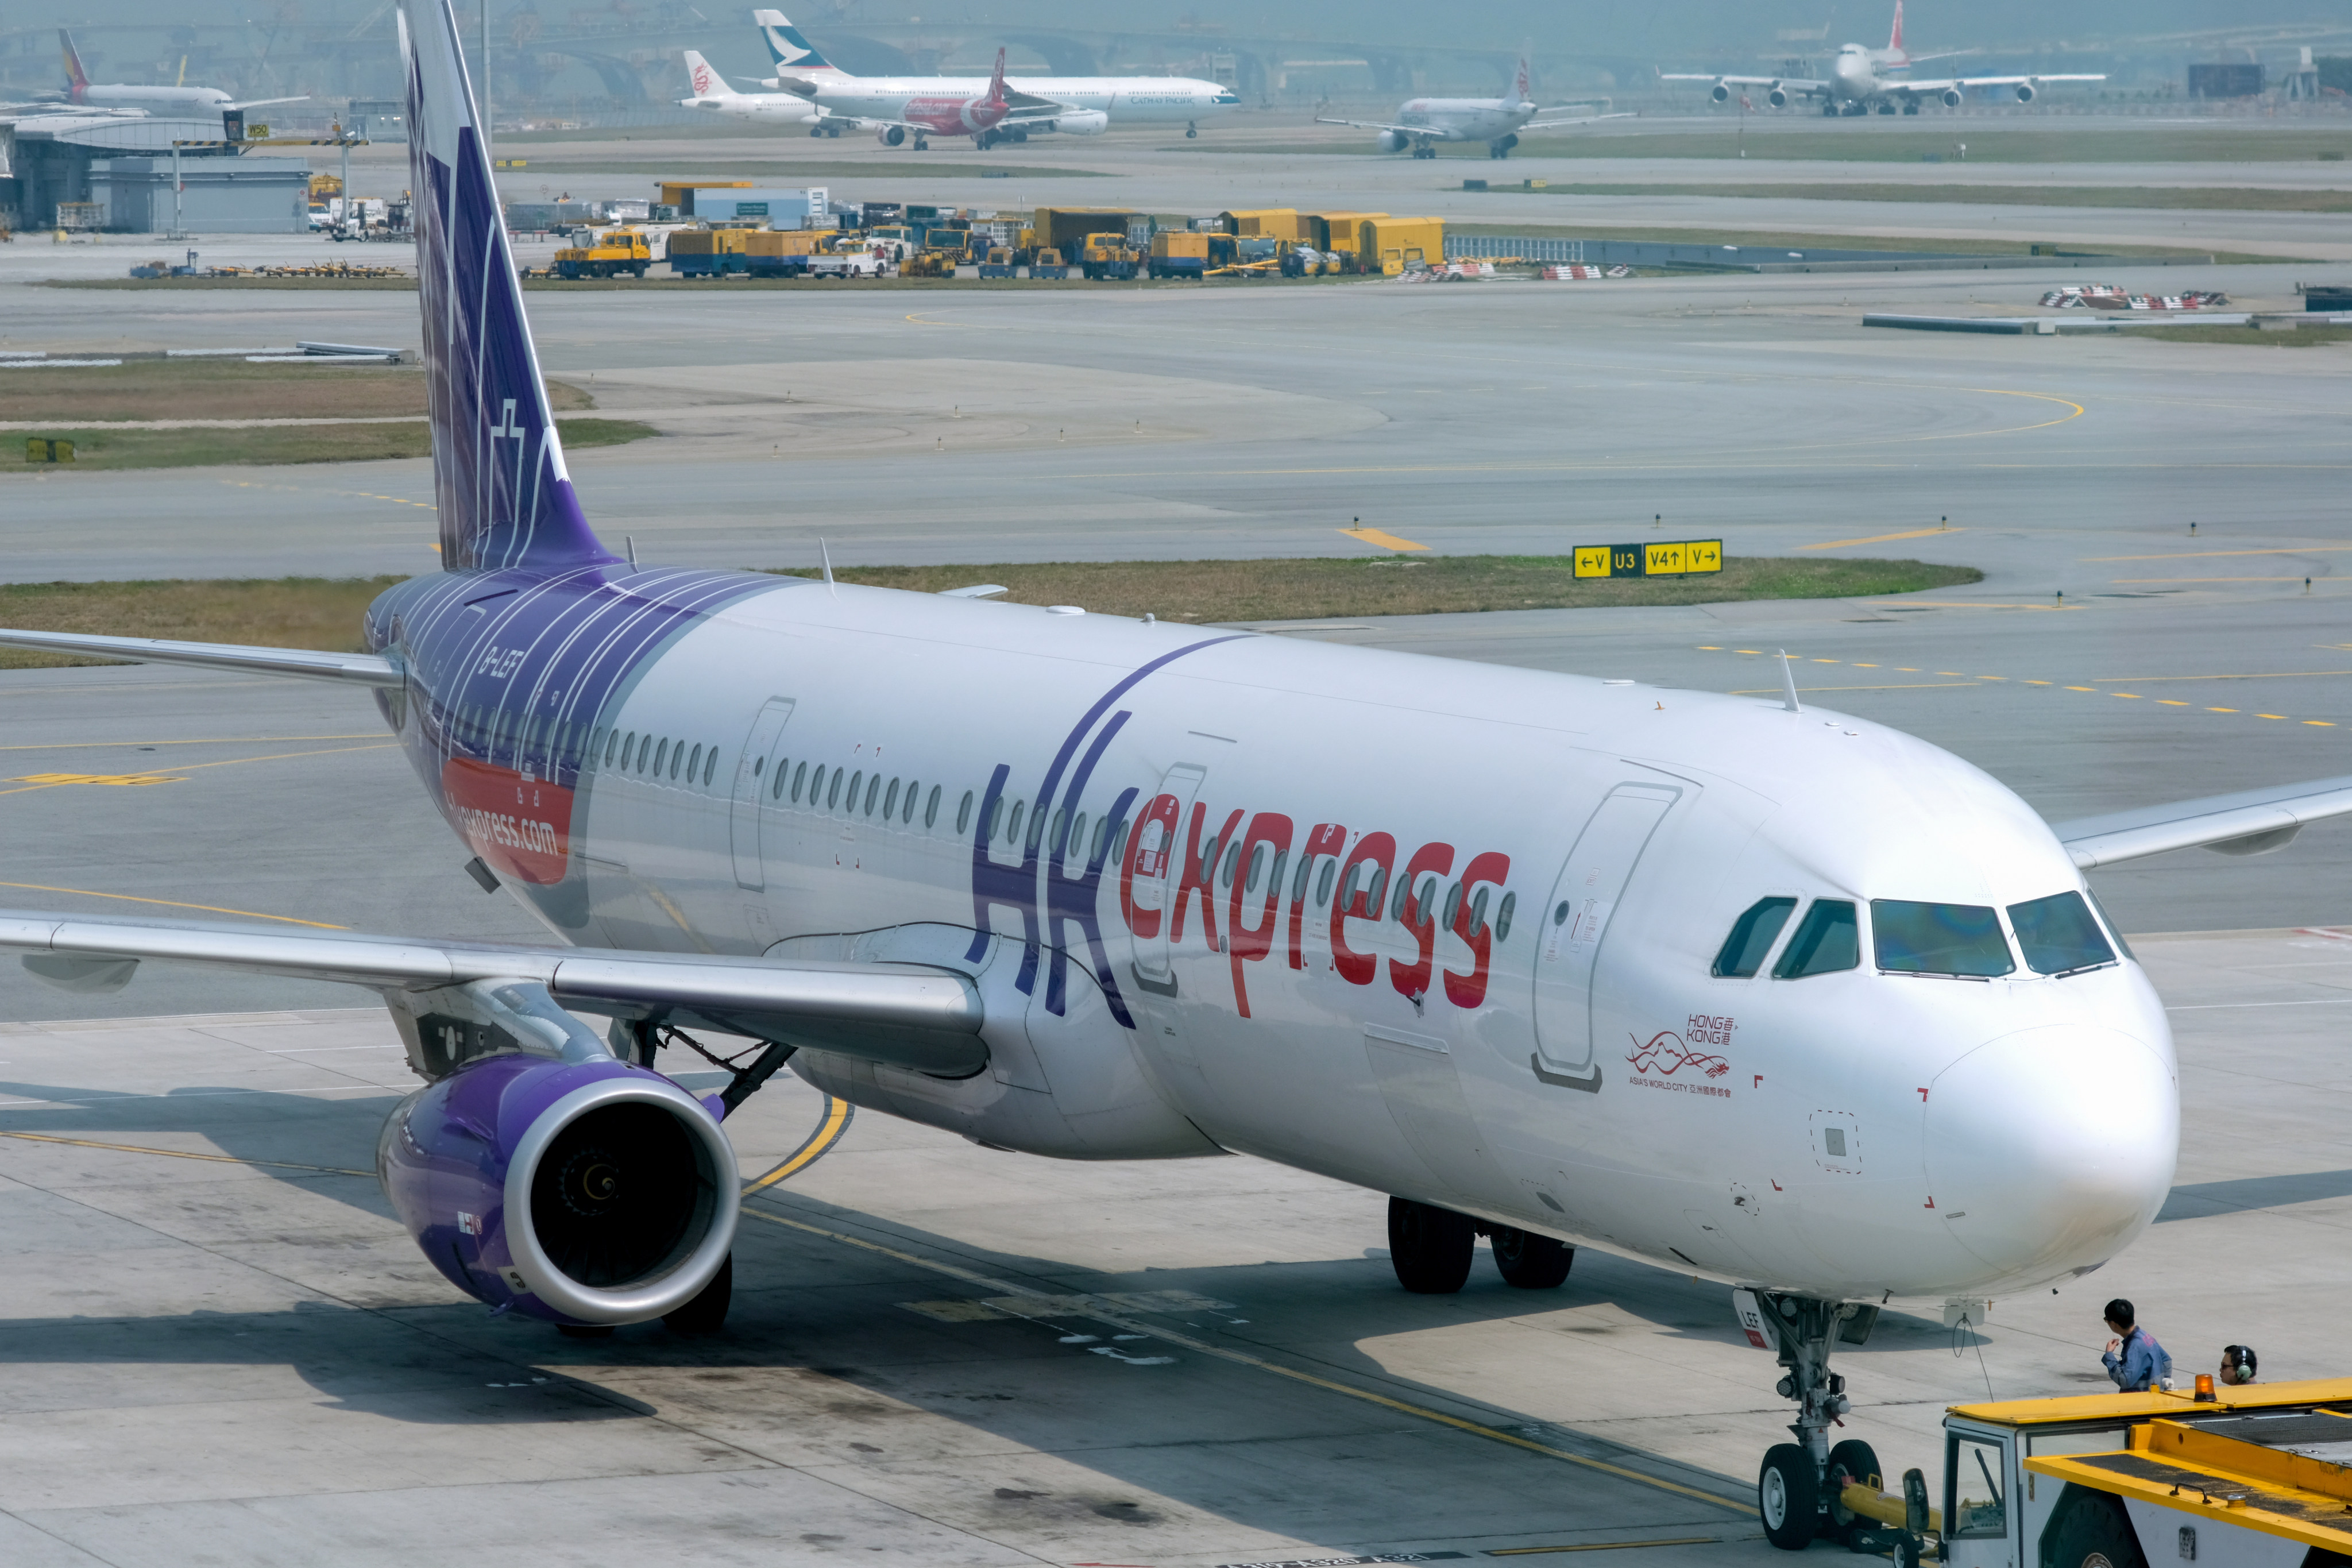 A HK Express plane landed in Hong Kong International Airport with smoke billowing from the aircraft on Monday afternoon. Photo: Fung Chang